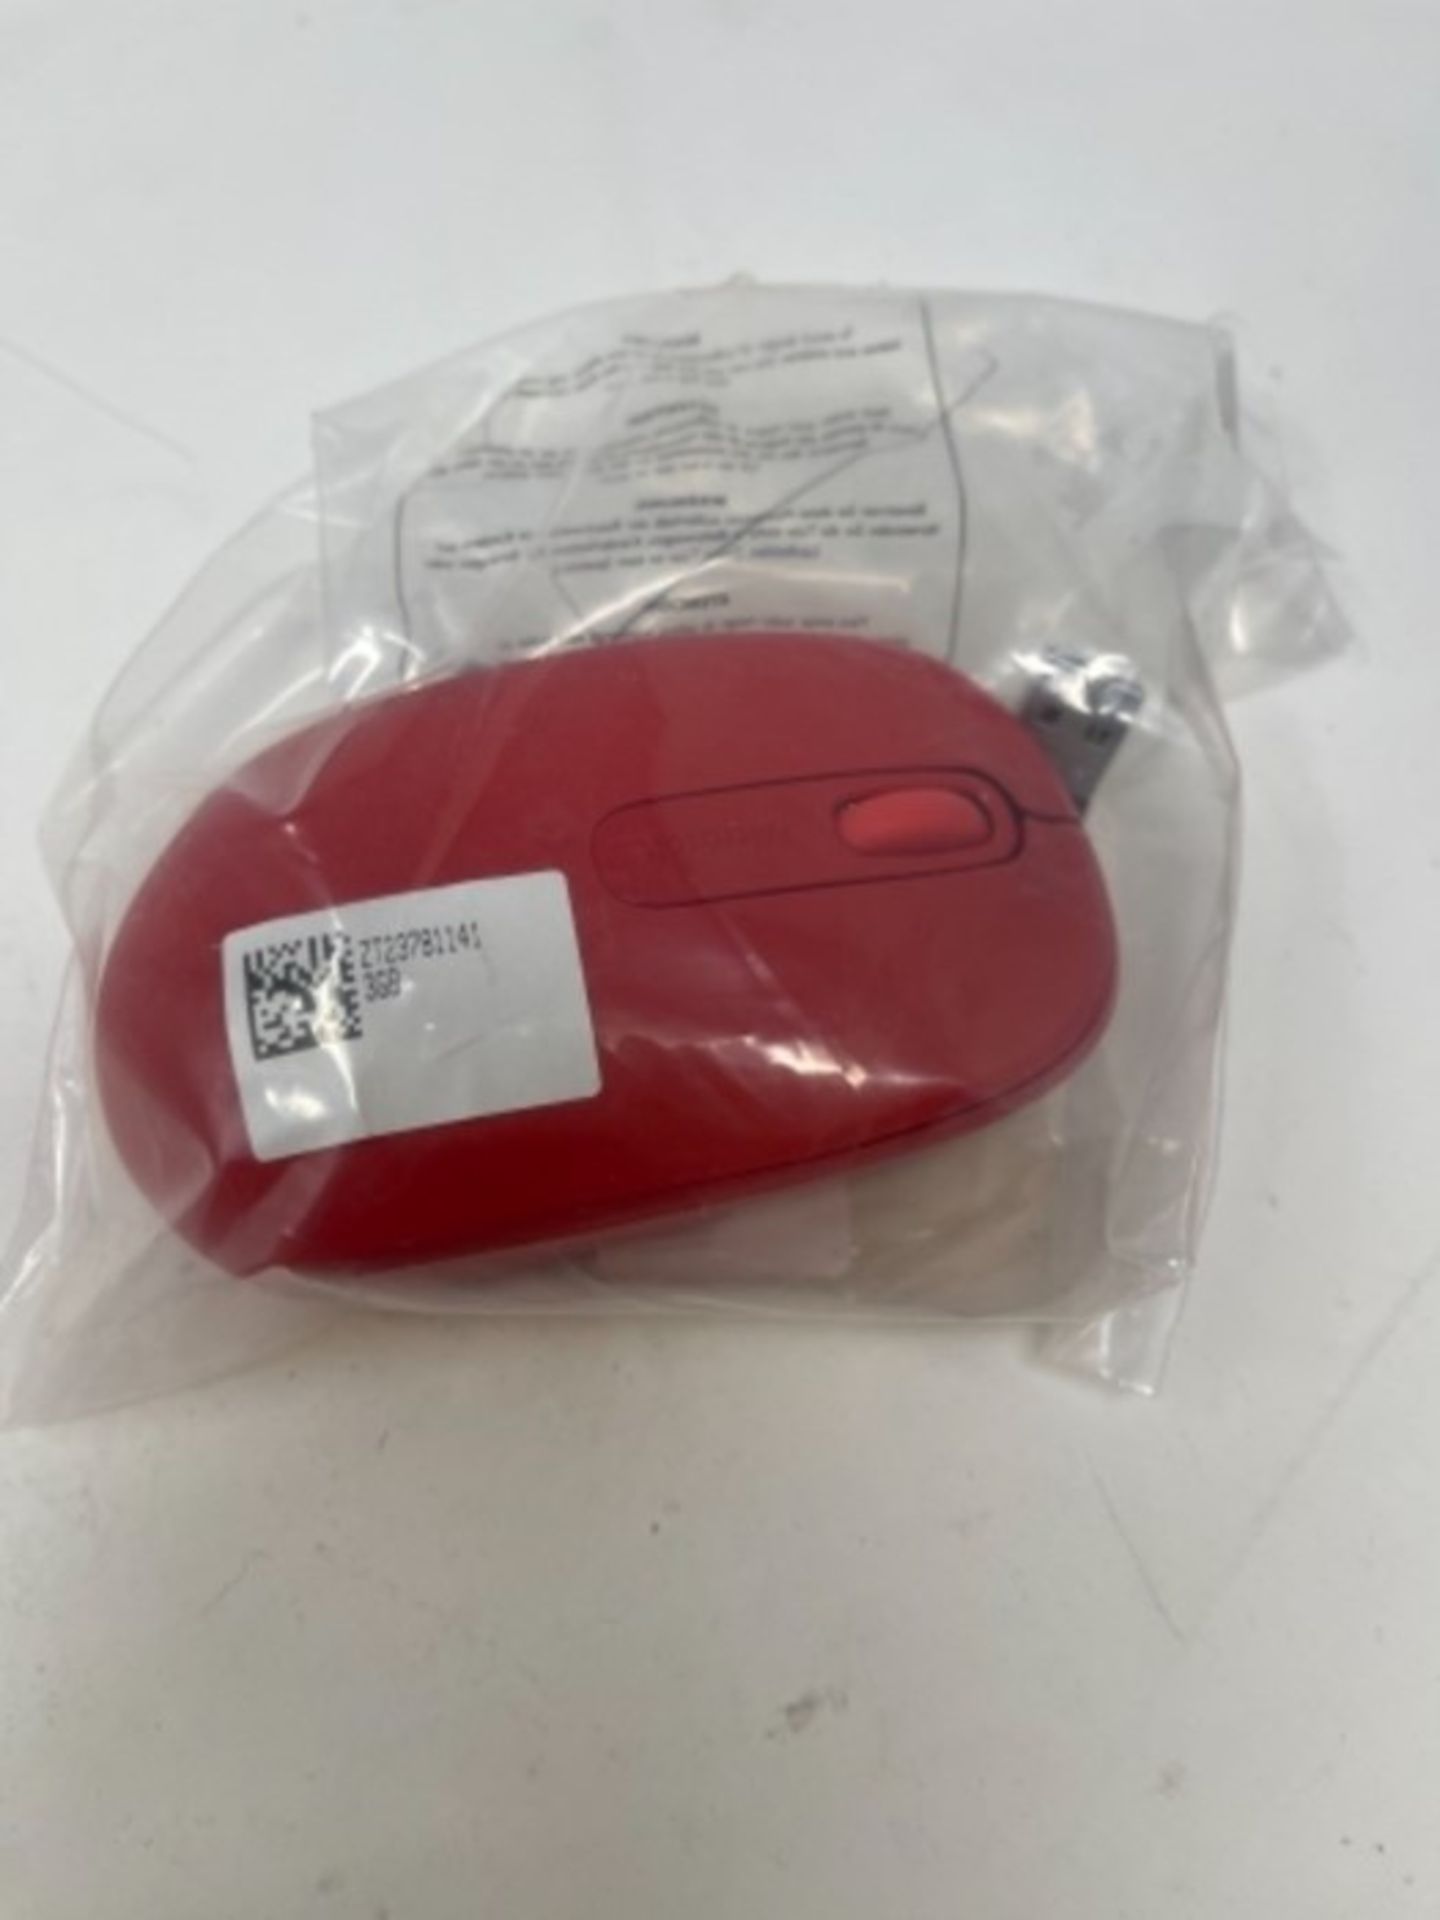 Microsoft 1850 3 Button Wireless Mobile Mouse - Flame Red - Image 3 of 4